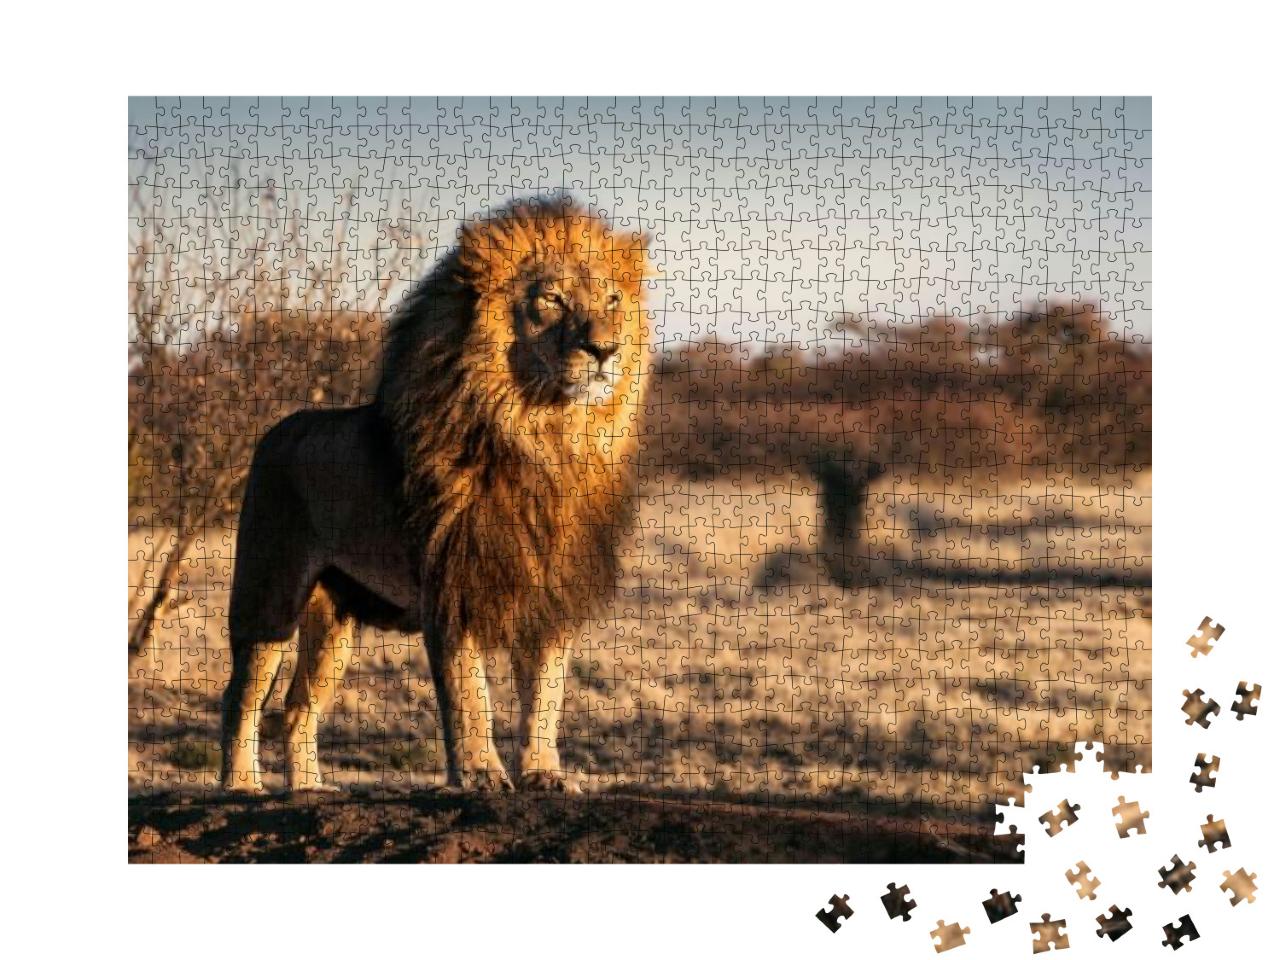 Single Lion Looking Regal Standing Proudly on a Small Hil... Jigsaw Puzzle with 1000 pieces